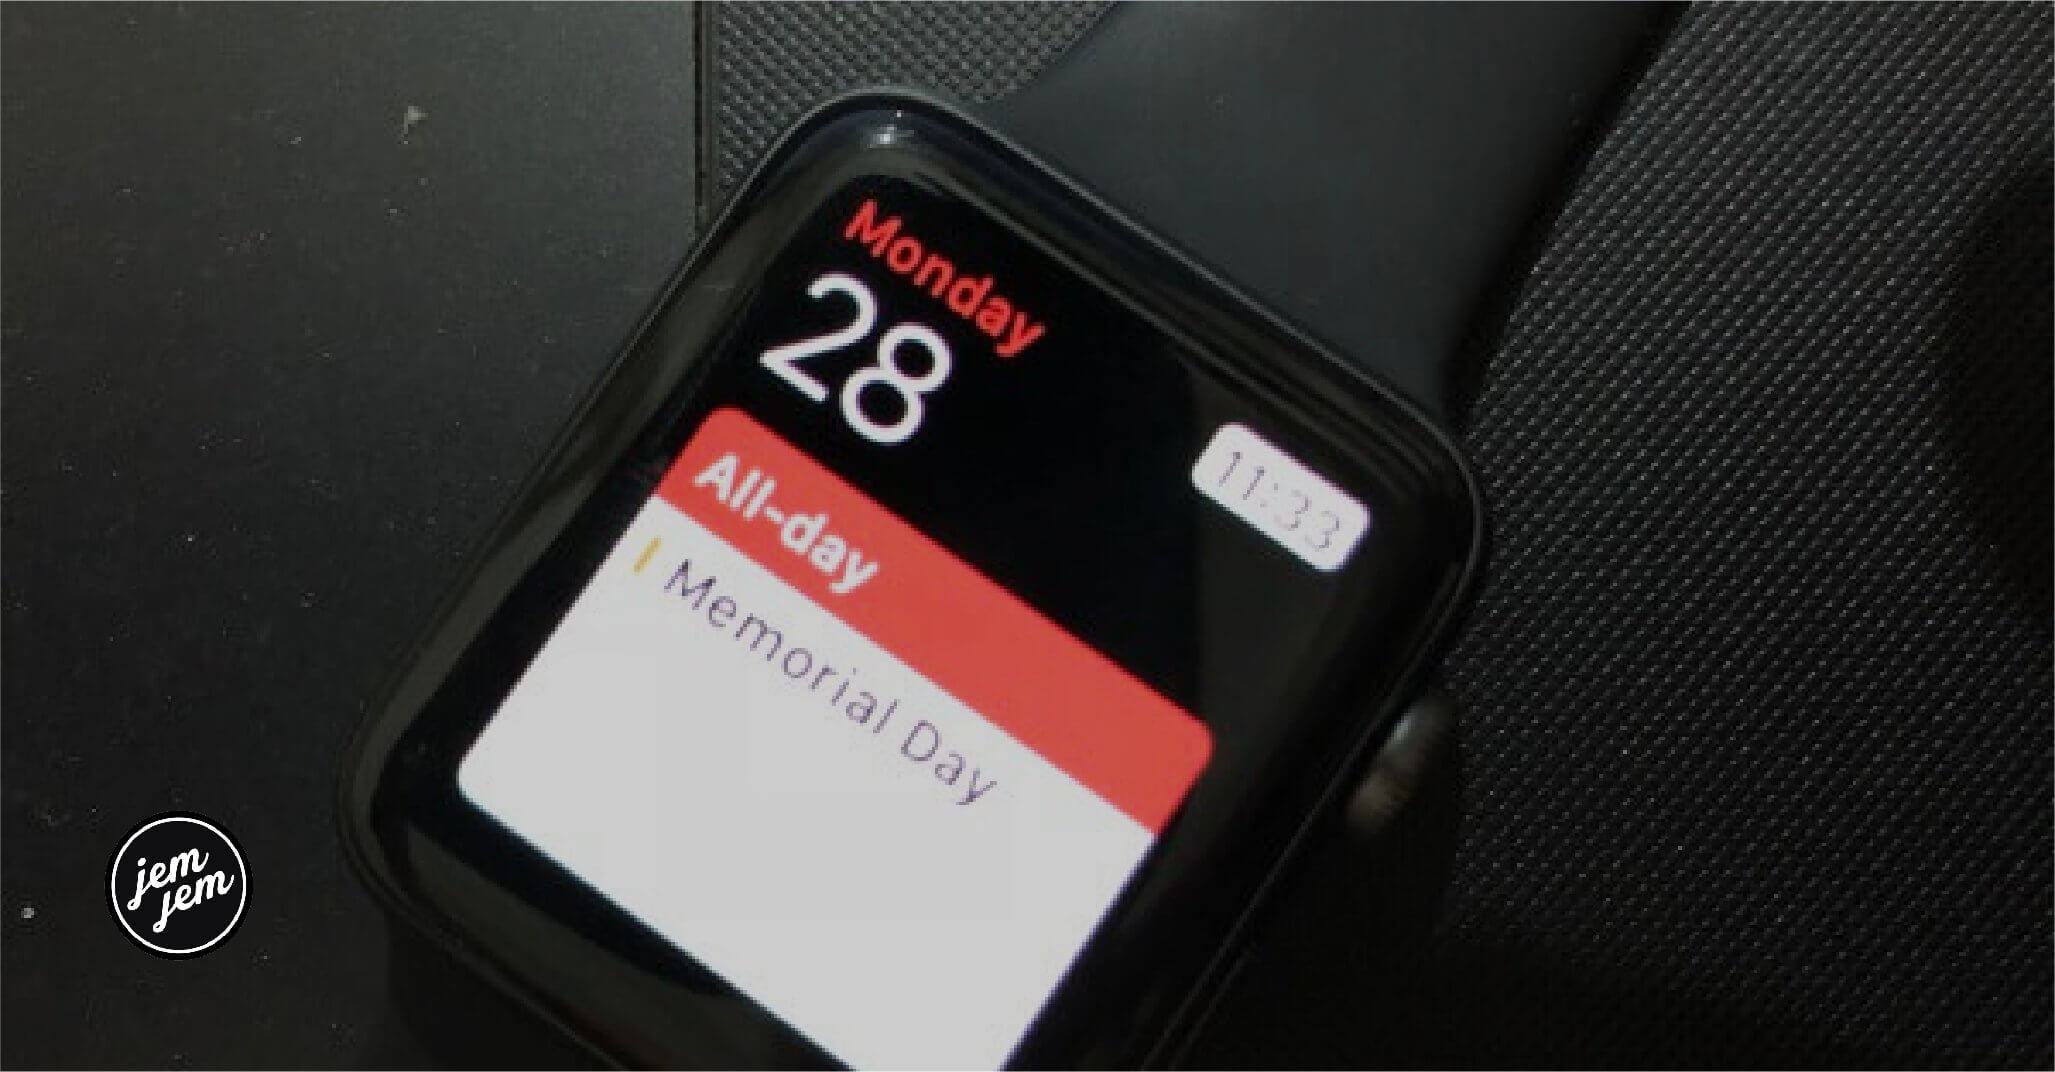 Apple Watch Calendar not syncing? Here's the fix!